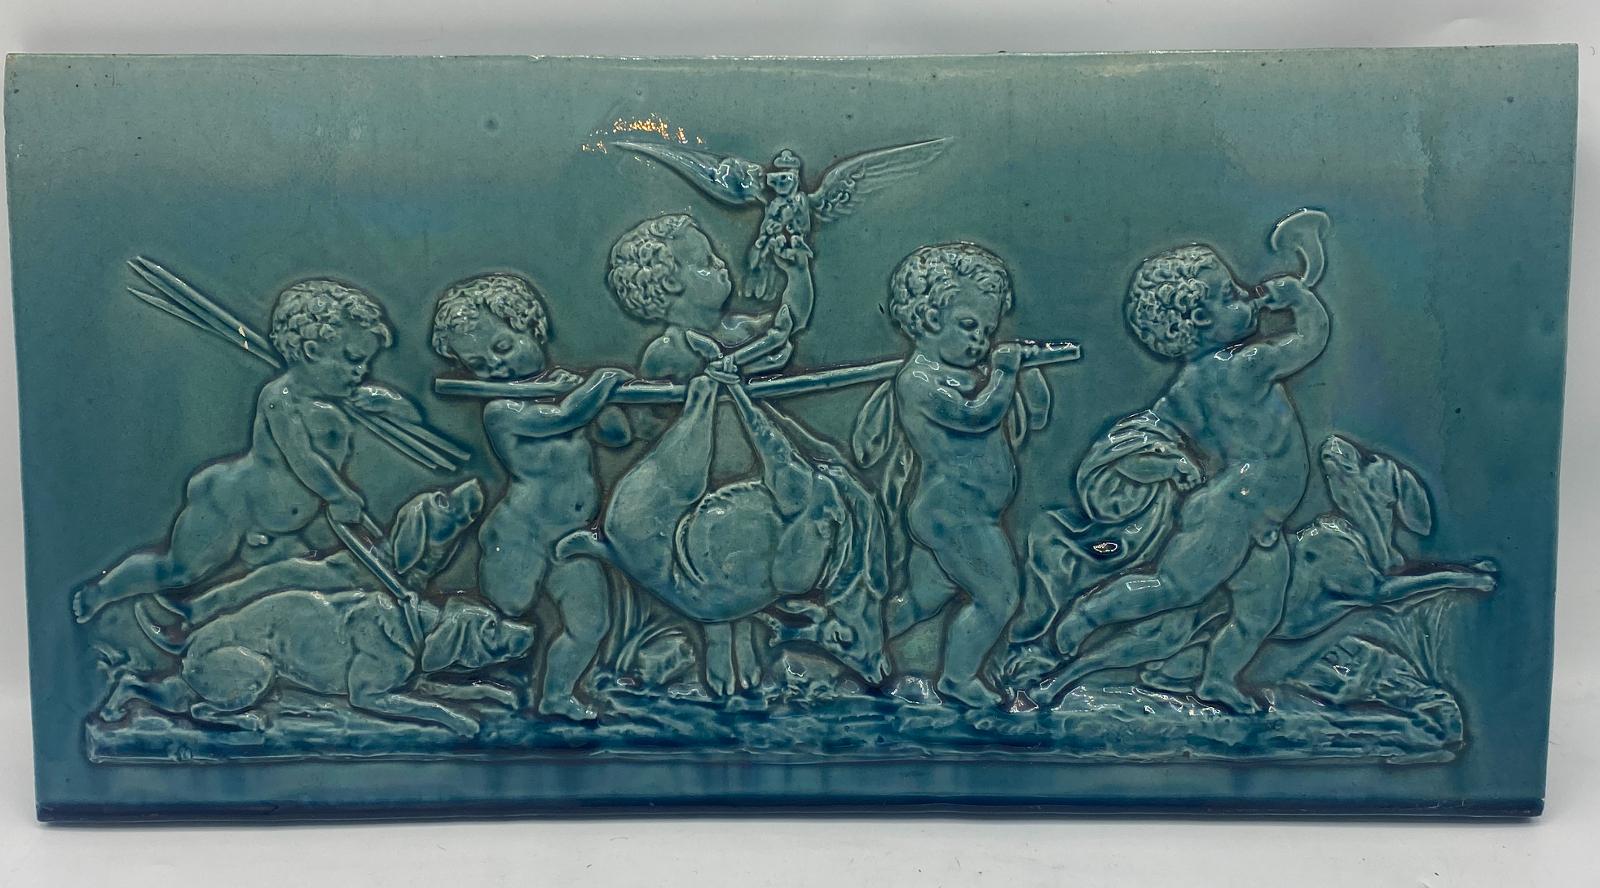 Late 19th Century Dunmore Pottery Victorian Green Glazed Ceramic Wall Plaques. These plaques were produced by Dunmore Pottery located on the estate of the Earl of Dunmore in Stilingshire, Scotland and depict cherubs on the hunt. The potter was Peter